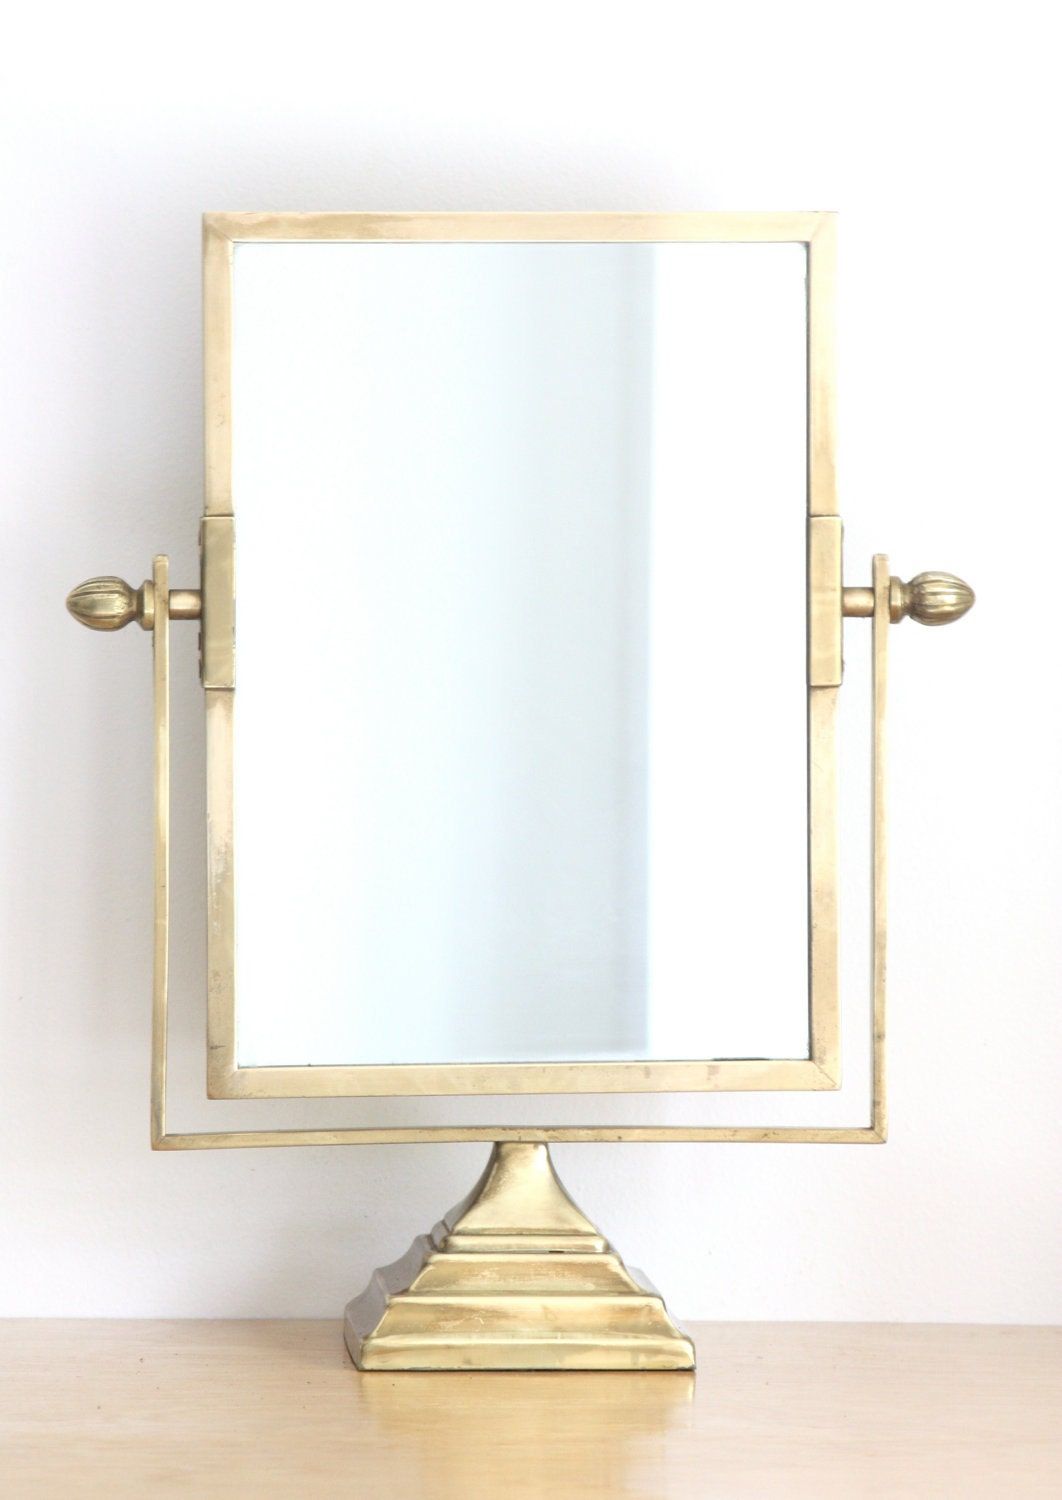 Large Antique Brass Pedestal Vanity Mirror In Aged Silver Vanity Mirrors (View 3 of 15)